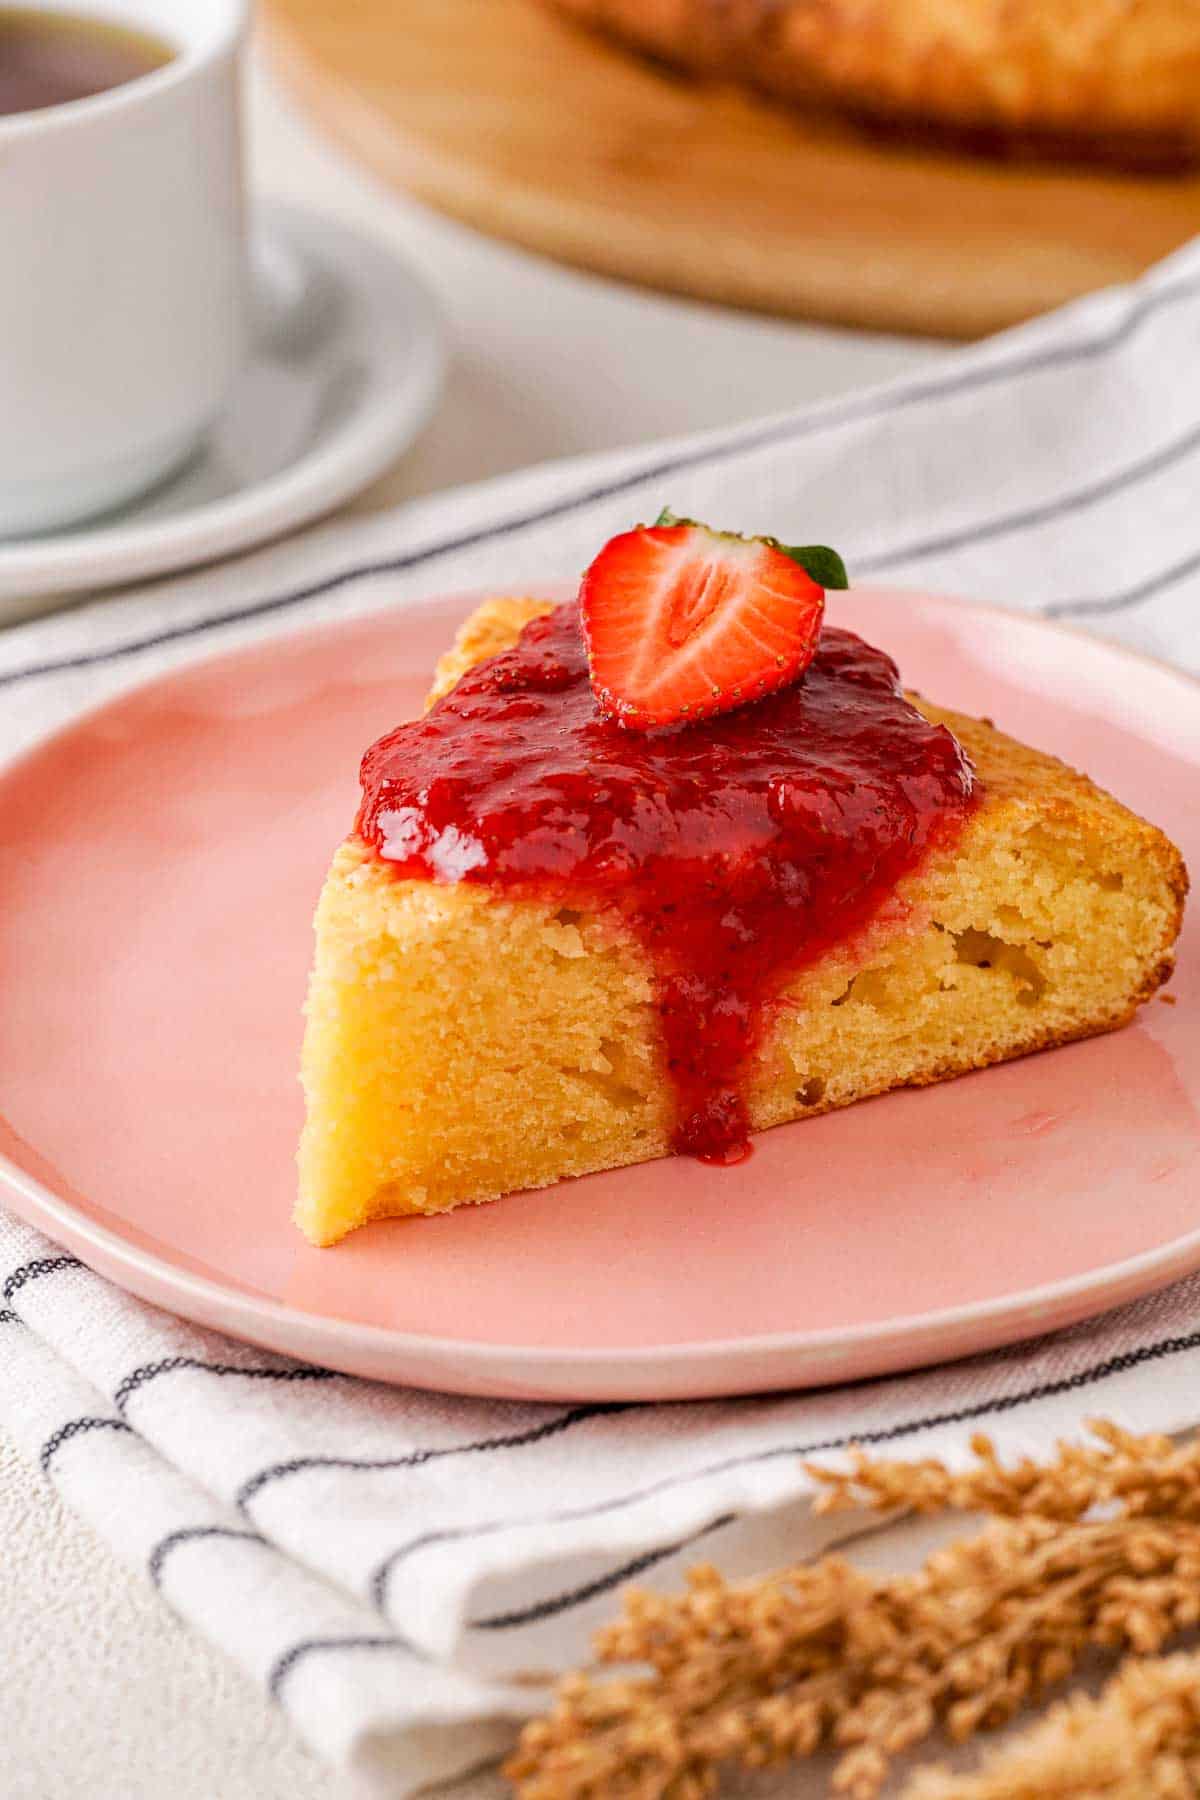 Cottage cheesecake with strawberry sauce and a sliced strawberry topping.